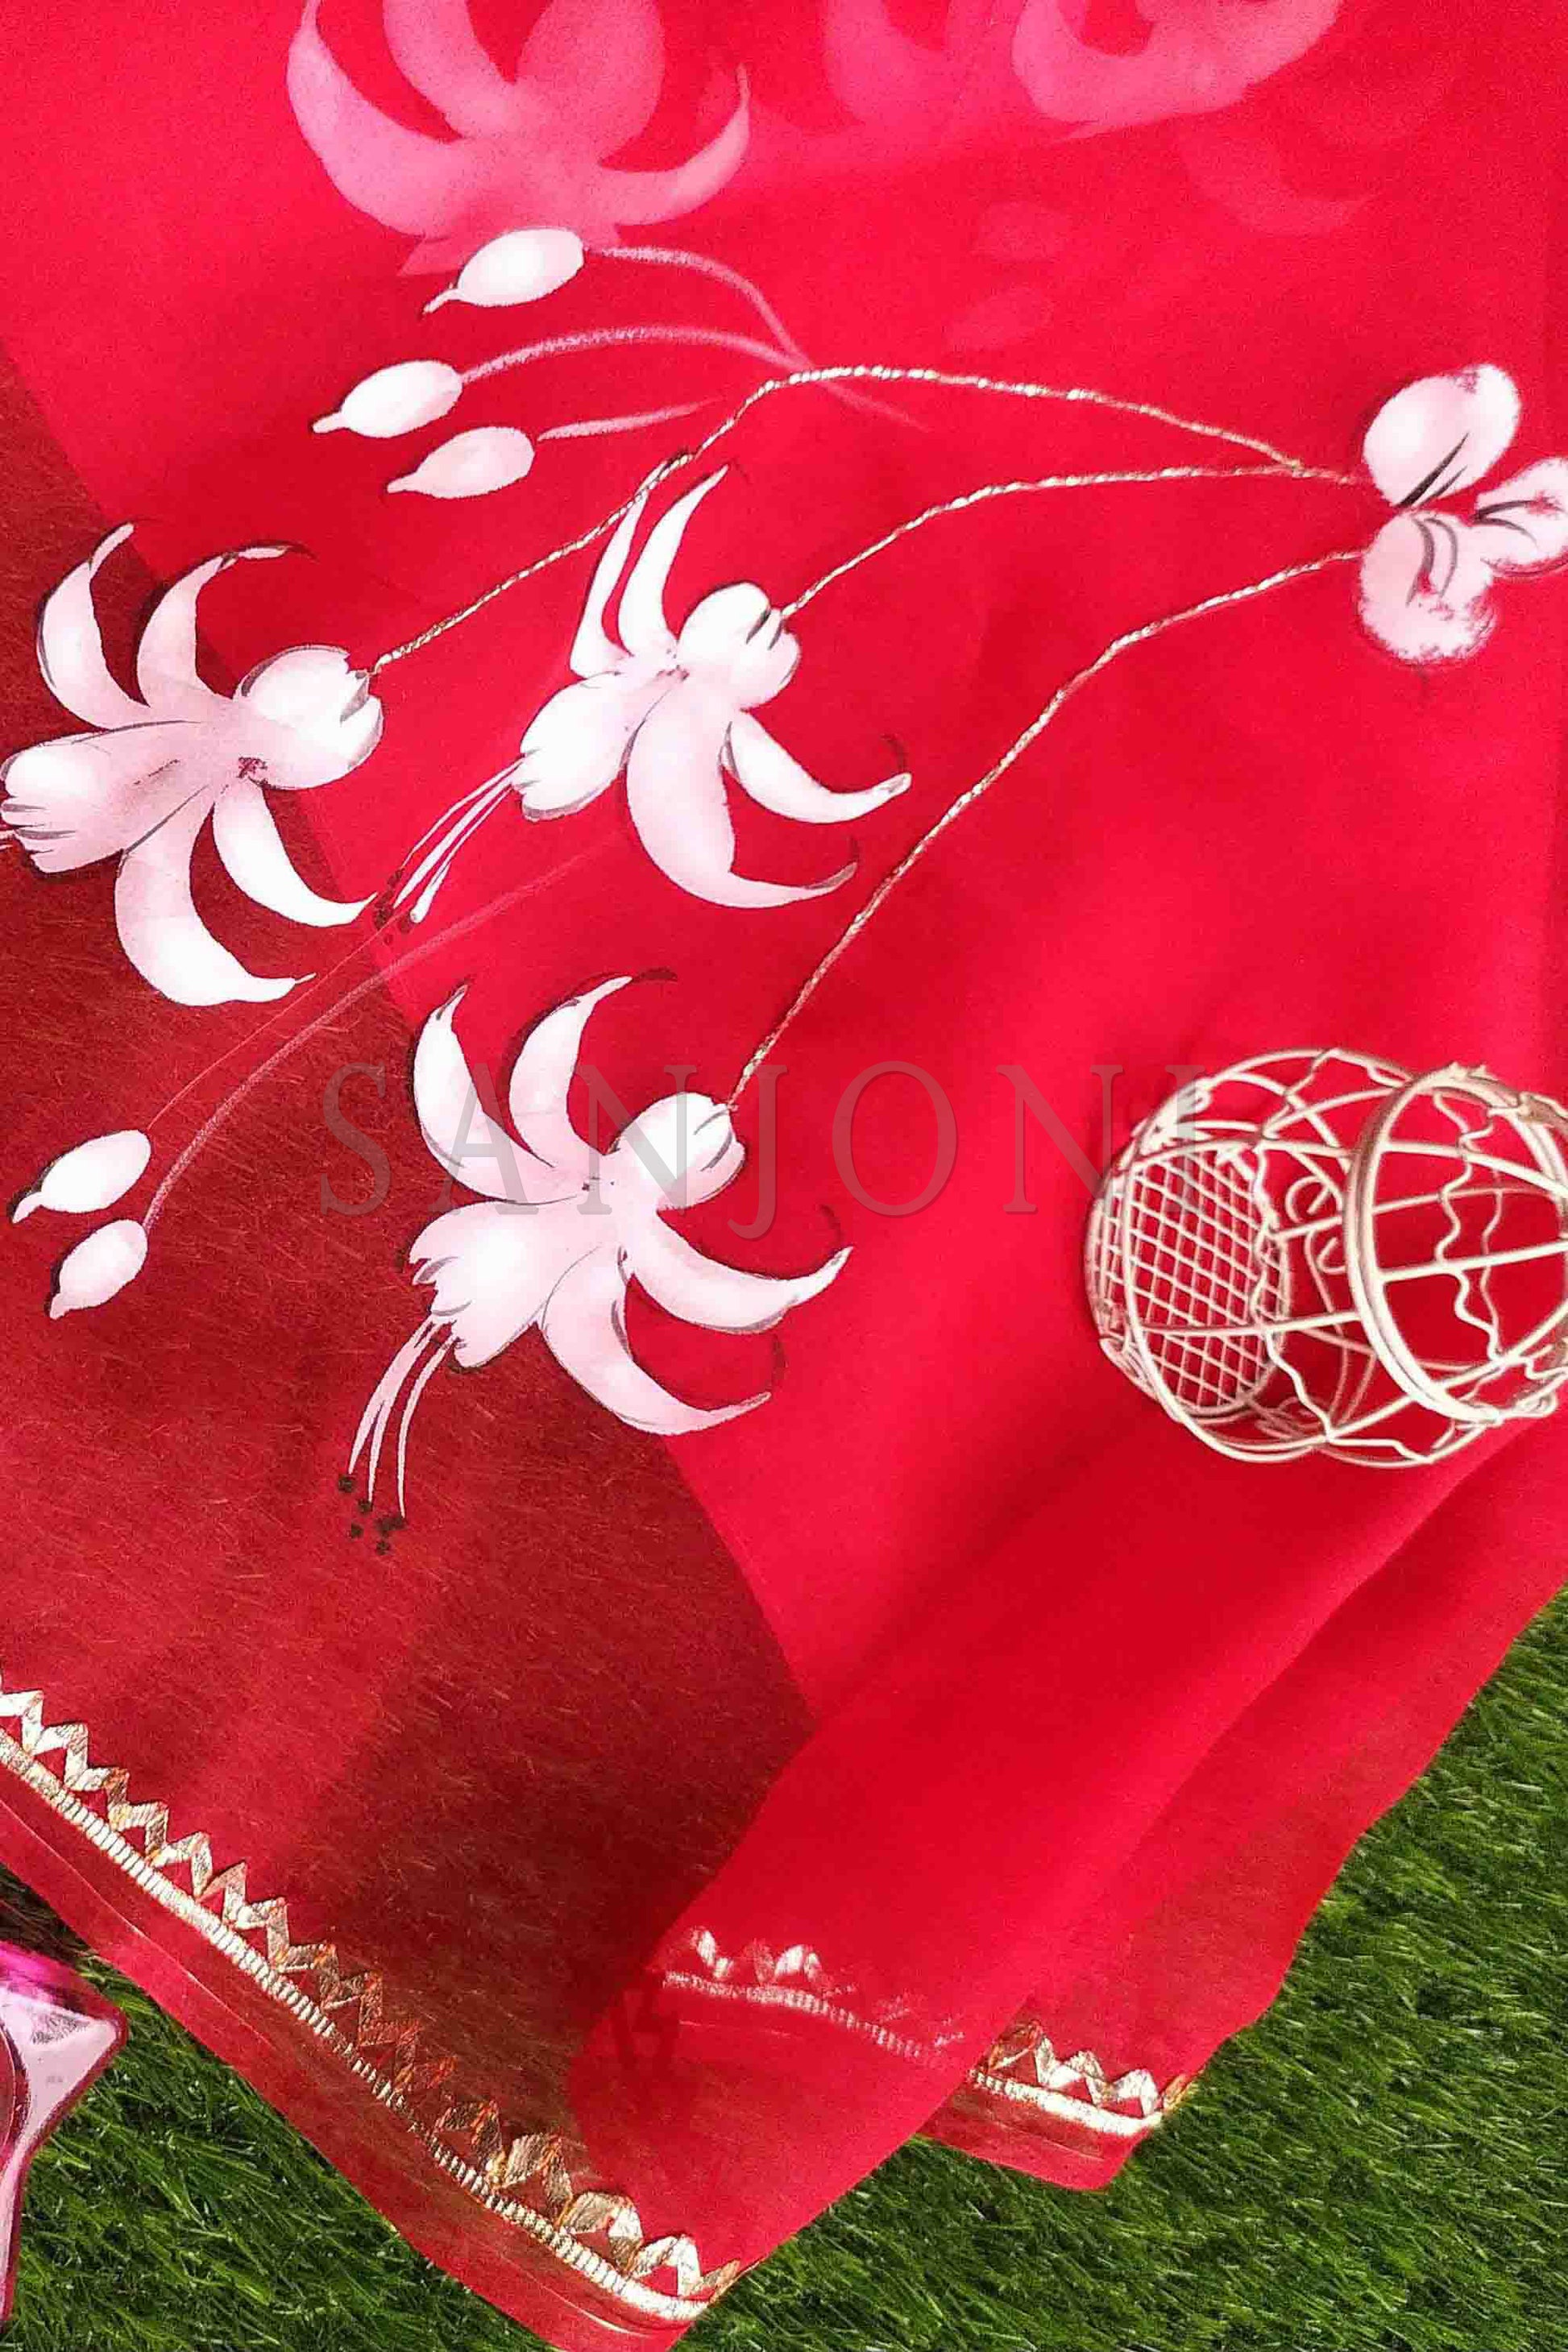 Hand-Painted Red Pure Silk Organza Saree with White Fuchsia Flowers and Metal Gota Embroidery - Perfect for Indian Weddings and Parties. Shop this Stunning Organza Saree Online for a Hot Saree Style. This Pure Silk Saree Features Exquisite Cloth Painting and Textile Paint for Fabric, Making it a Unique Hand-Painted Saree. Get the Saree Look You Desire with this Simple Saree Design. Explore Our Saree Shop for More Sadi Ka Design and Saree Options.